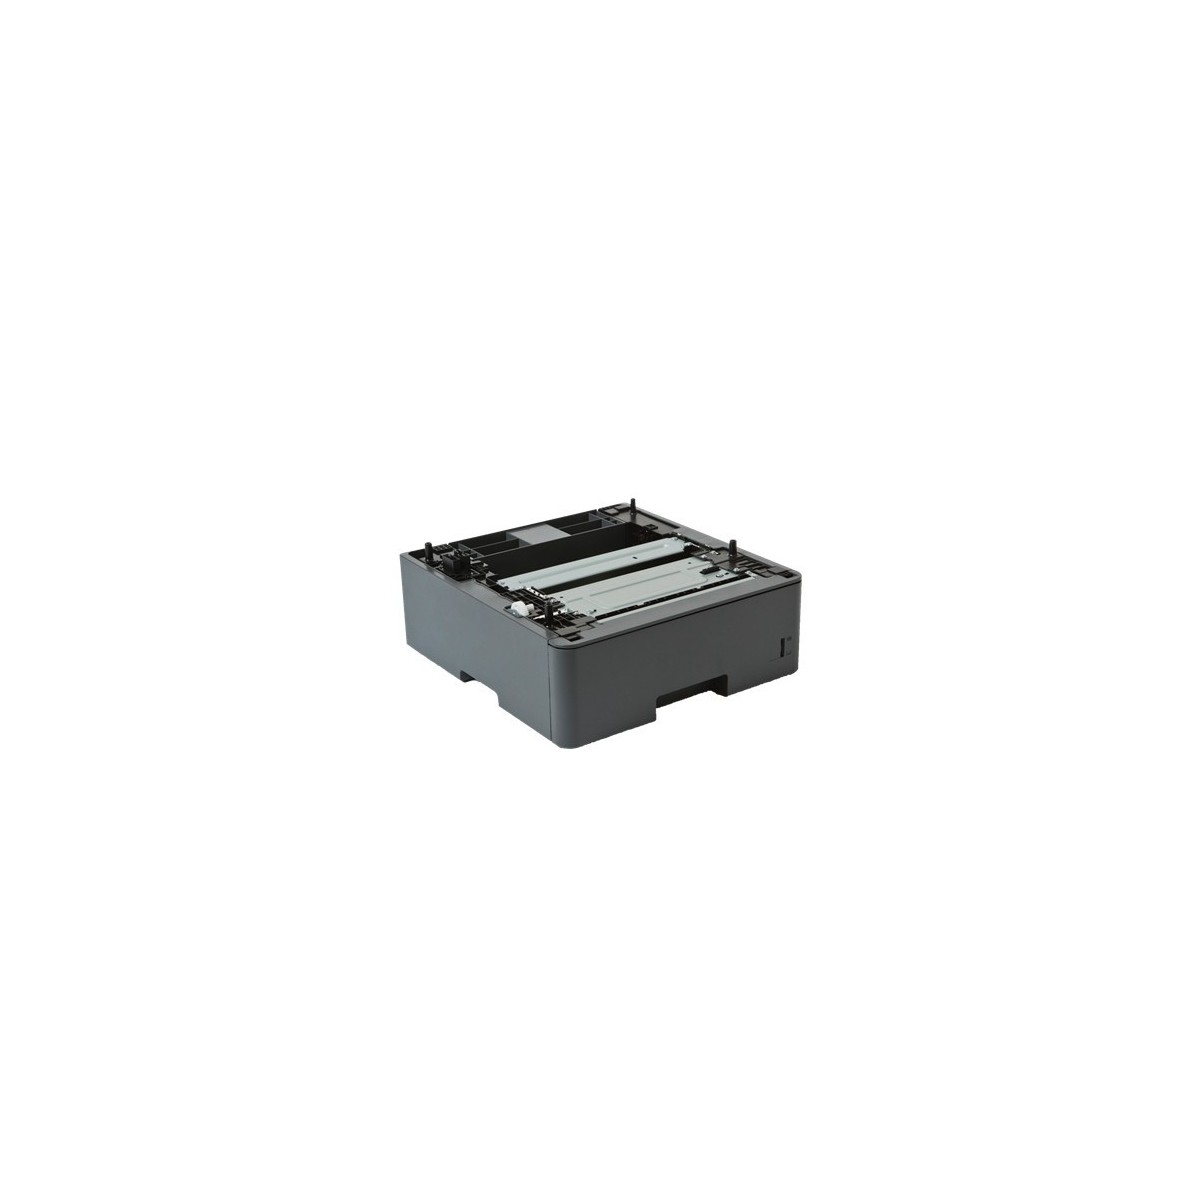 Brother LT-6500 - Auto document feeder (ADF) - Brother - HL-L6250DN - DCP-L5500DN L5600DN L5650DN - HL-L5000D L5100DN L5200 L620